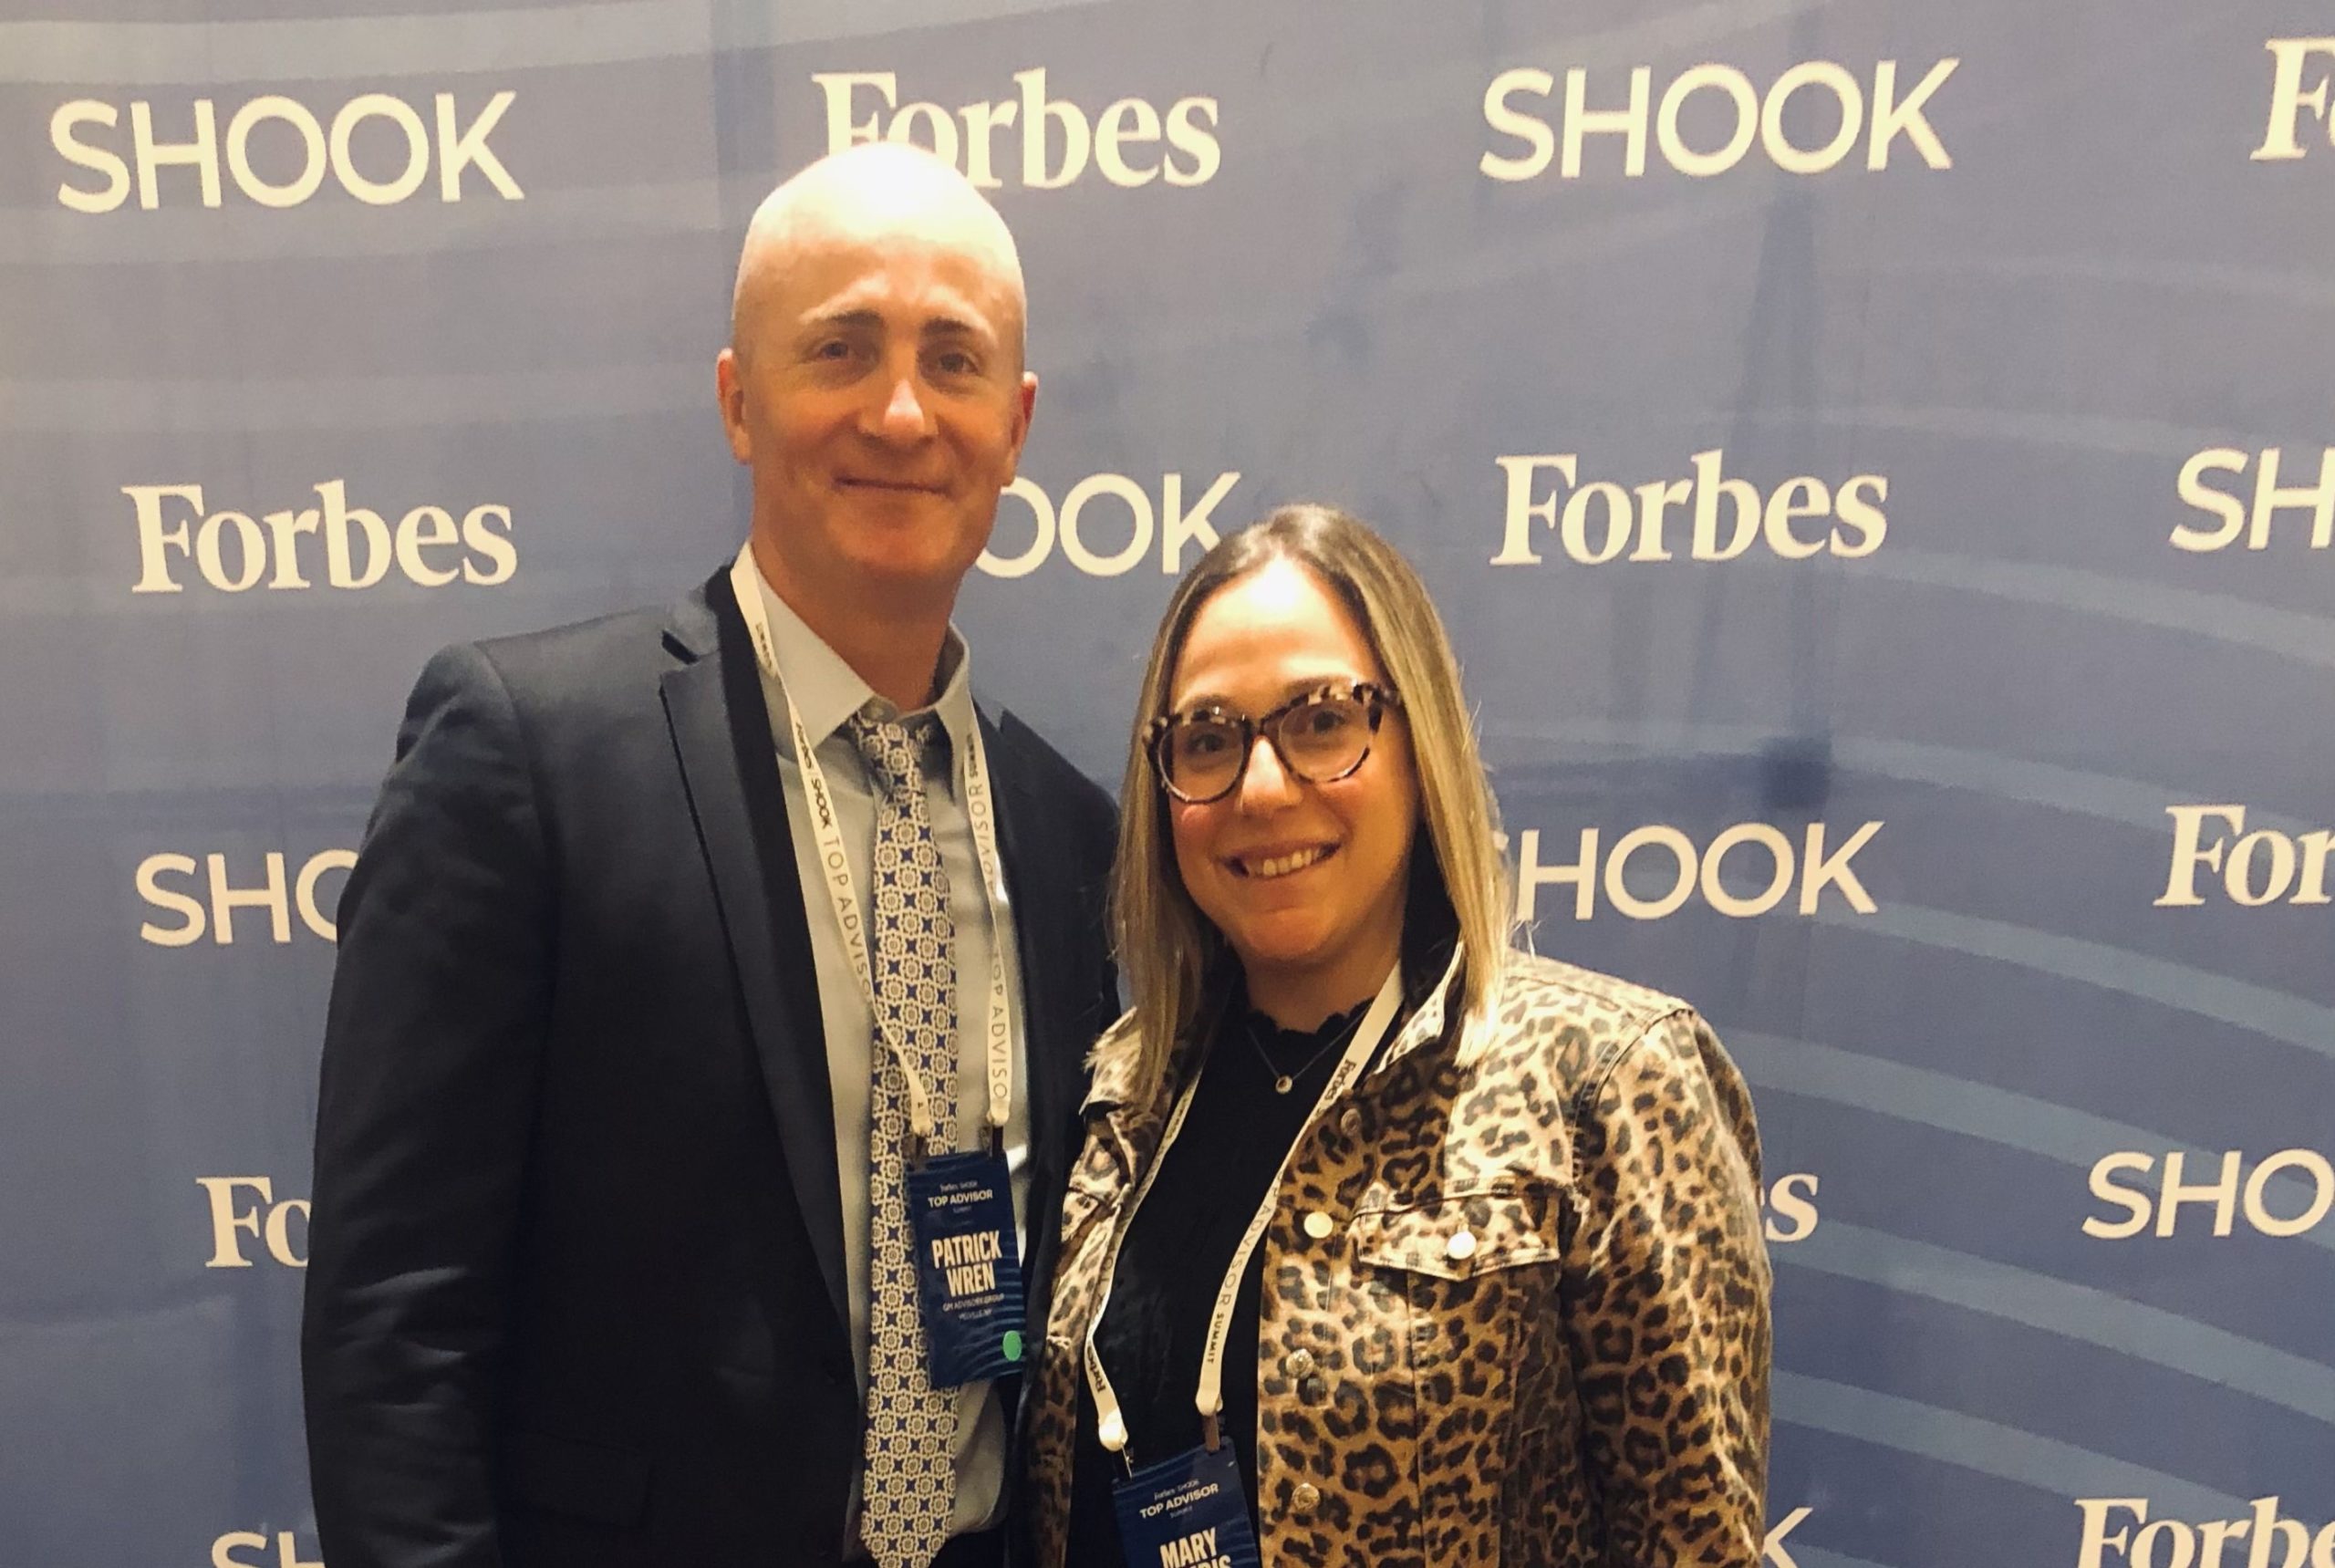 Patrick Wren and Mary Zembis at the 2021 Forbes/SHOOK Top Advisor Summit in Las Vegas